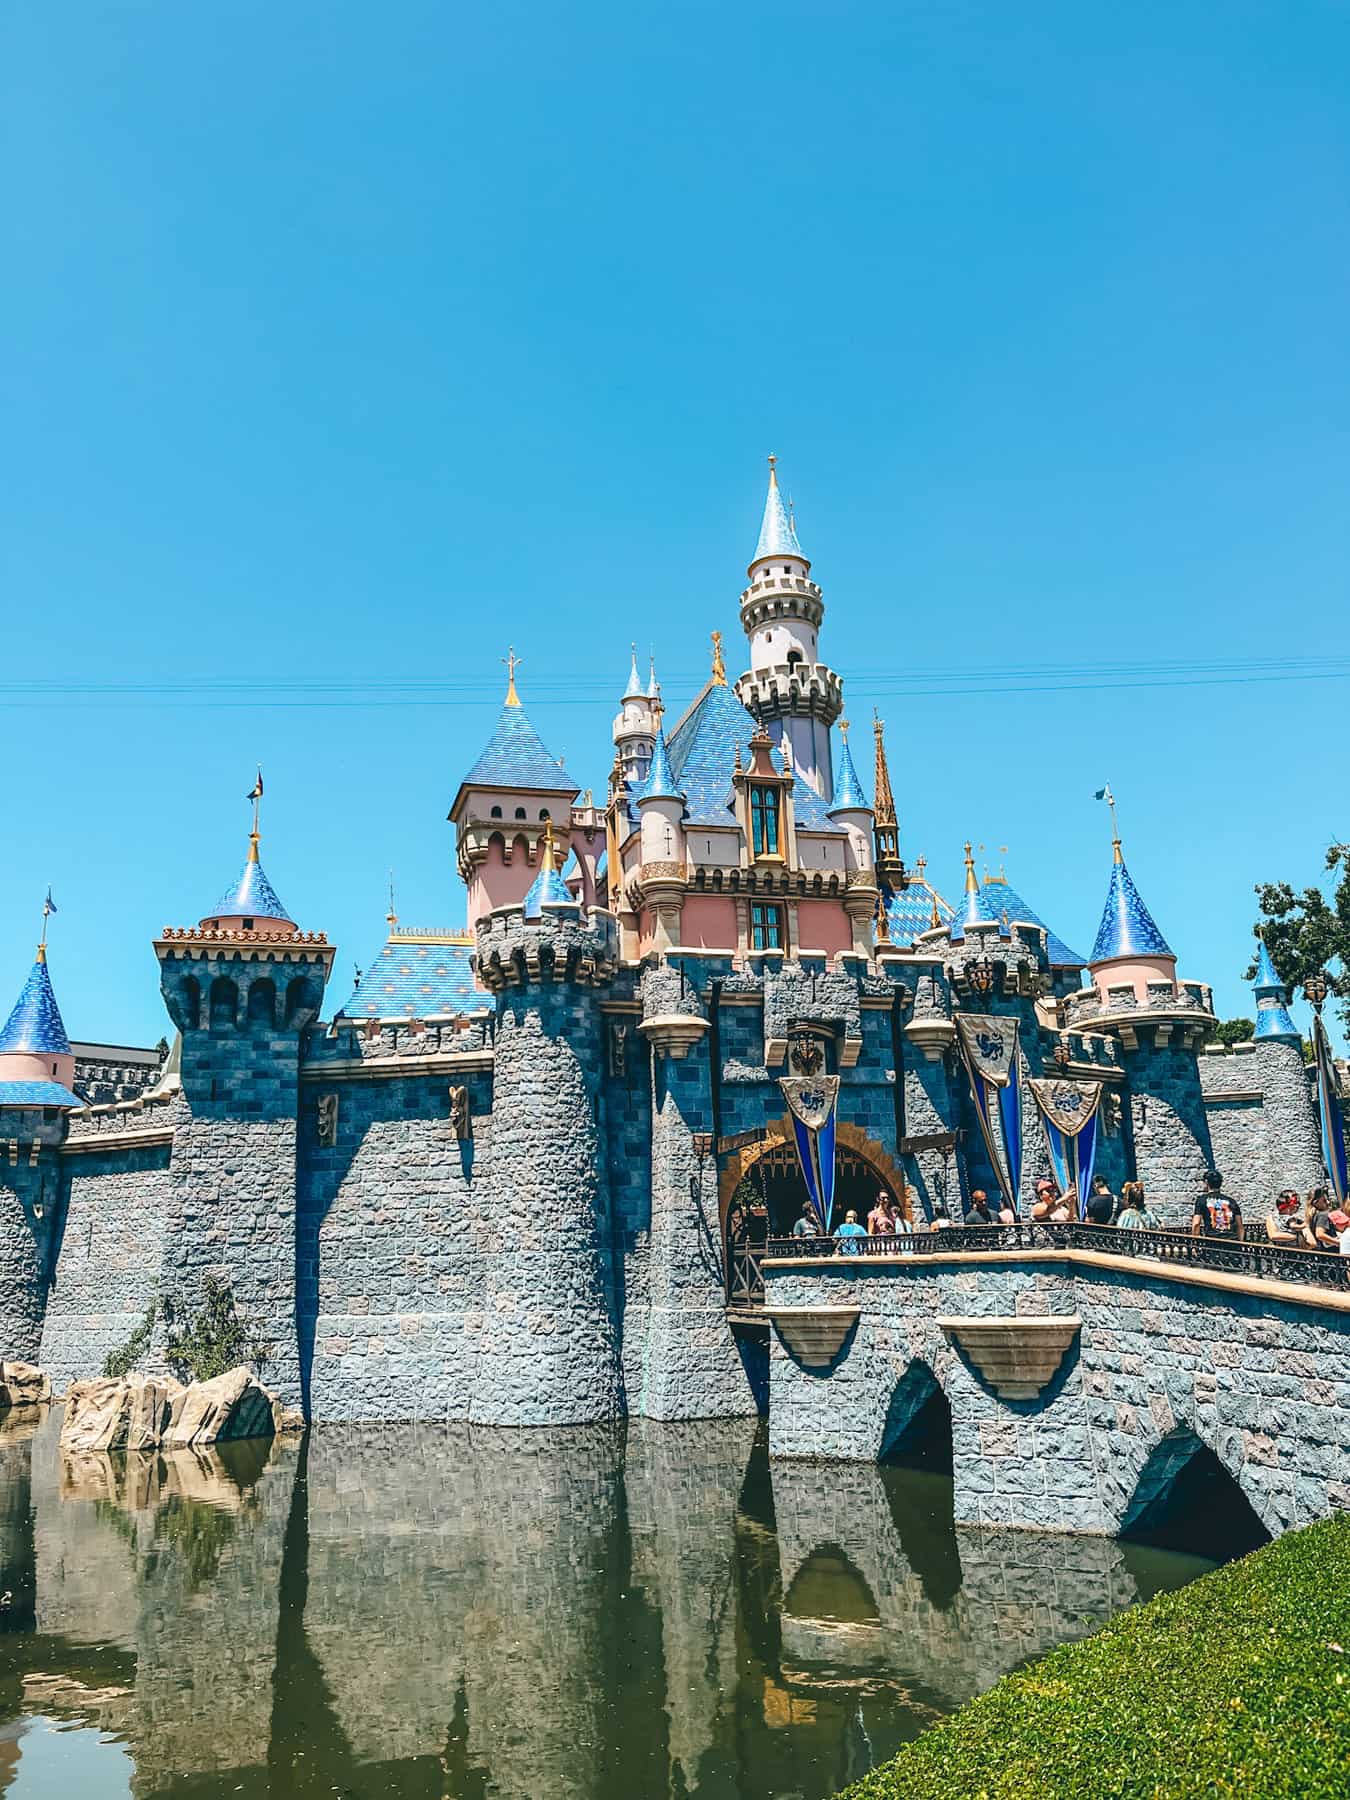 Cinderella's Castle at Disneyland, with its iconic pink and blue turrets, reflected in the moat under a clear blue sky. The fantasy architecture and vibrant banners create a magical atmosphere in the theme park.